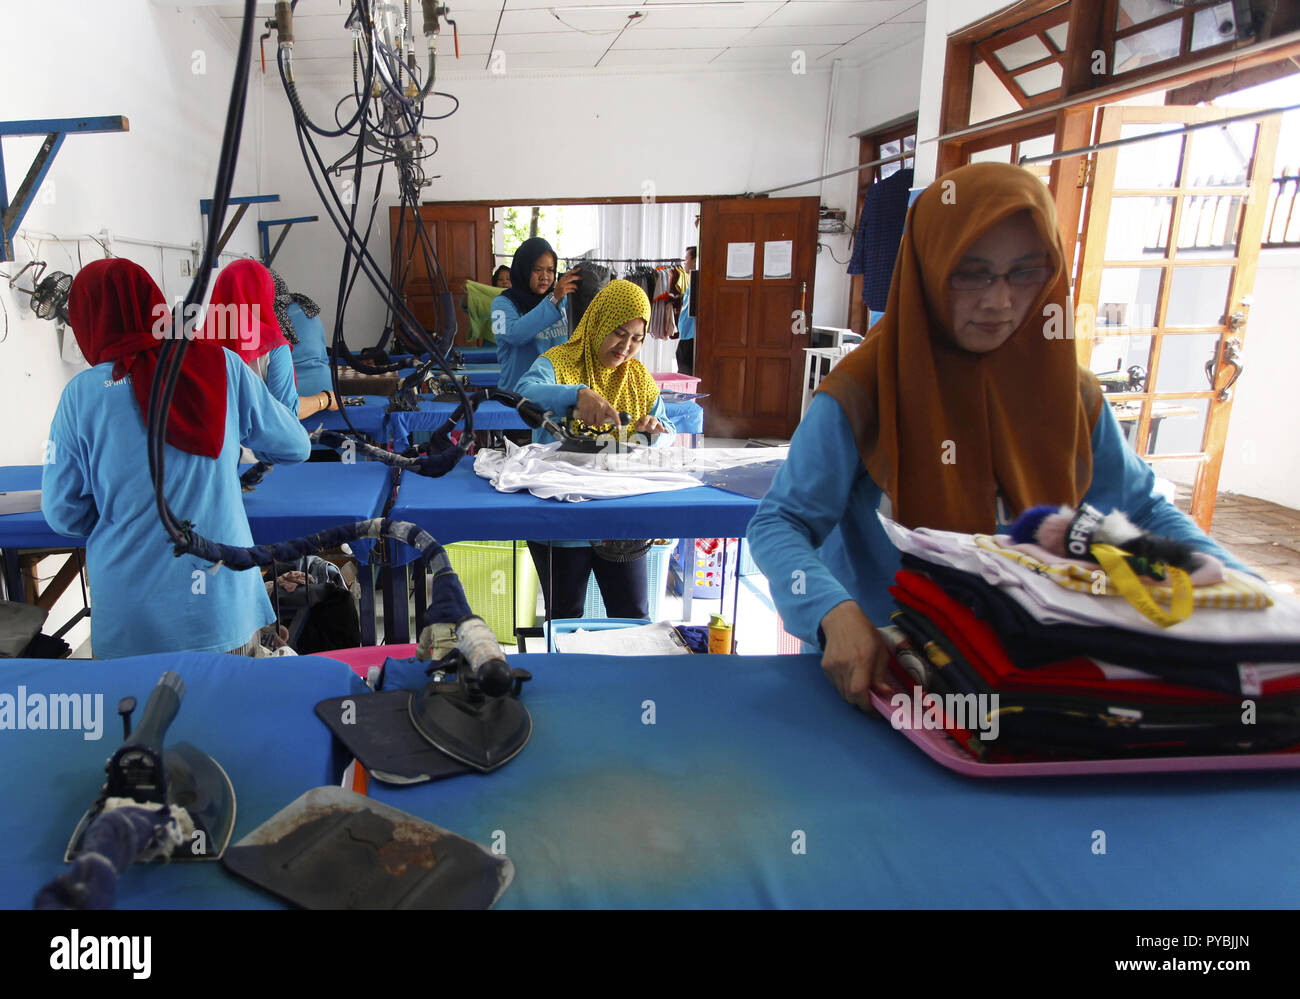 Bogor, West Java, Indonesia. 10th Apr, 2018. Workers are seen ironing  clothes at the Laundry company. Laundry companies use gas energy in the  form of Compressed Natural Gas (CNG) owned by the